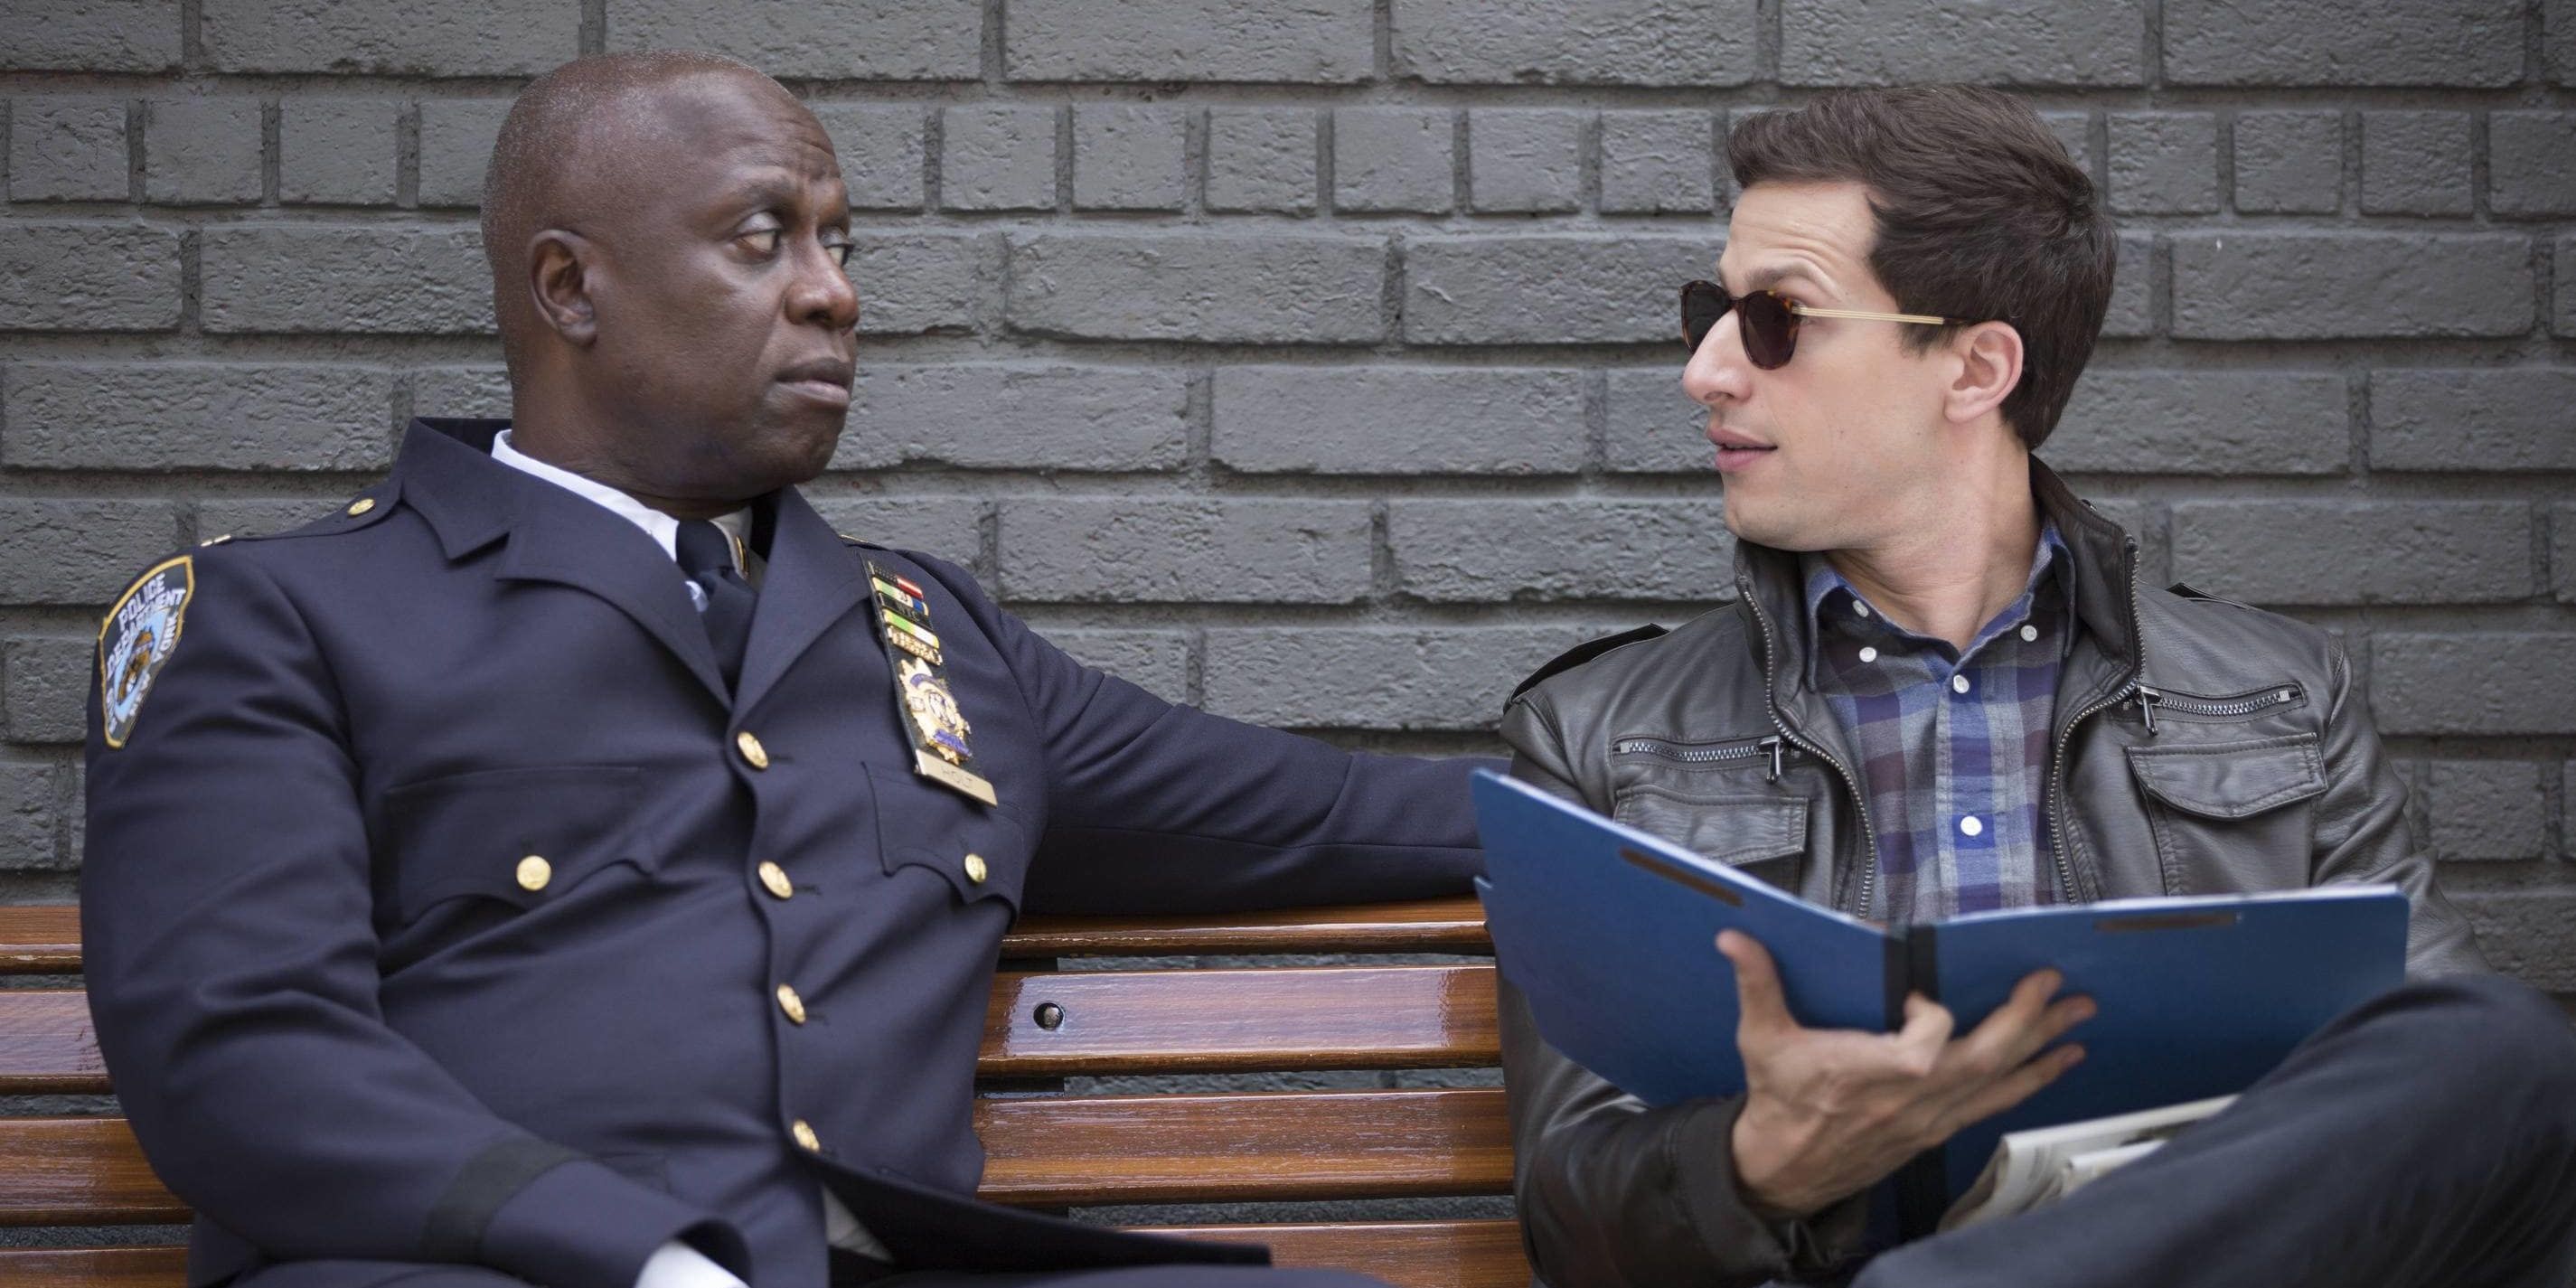 Jake and Captain Holt talk on a bench.